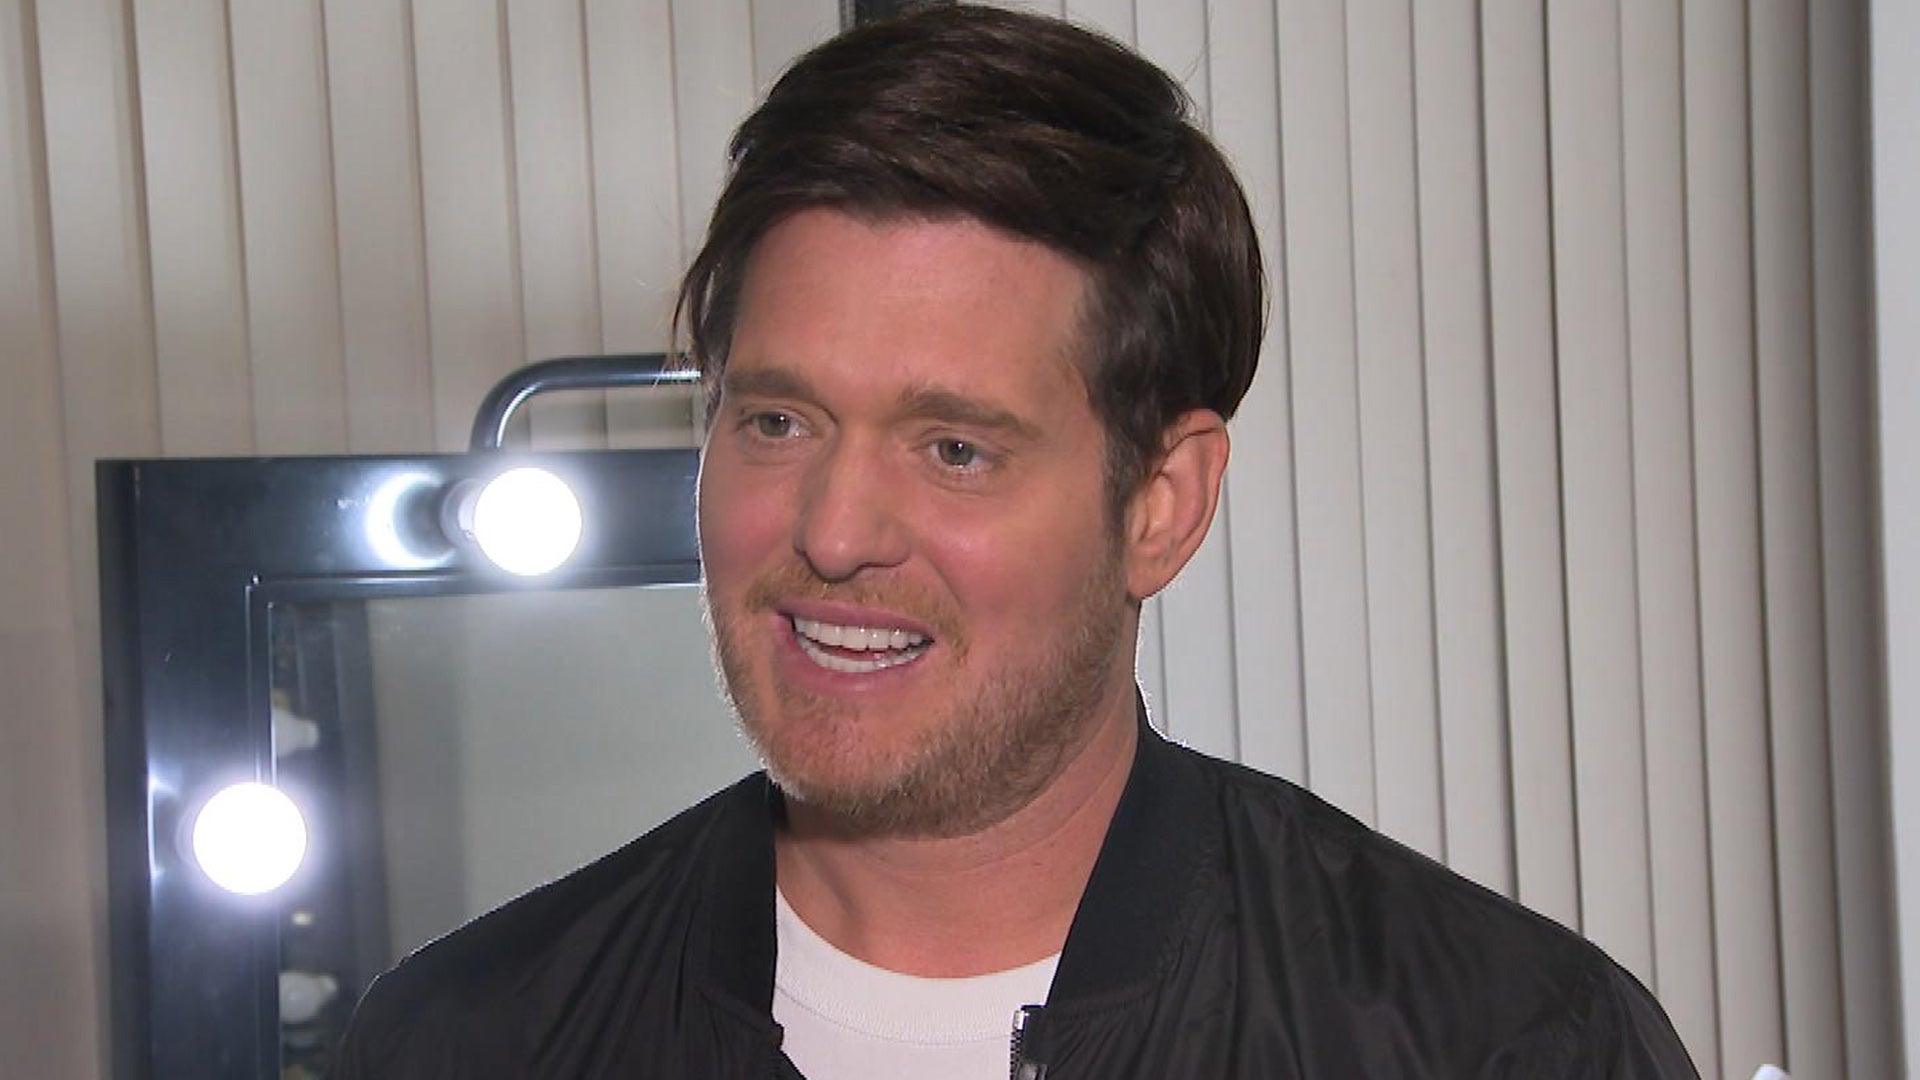 Michael Bublé on Recreating Iconic ‘Notebook’ Scene With His Wife for New Music Video (Exclusive)